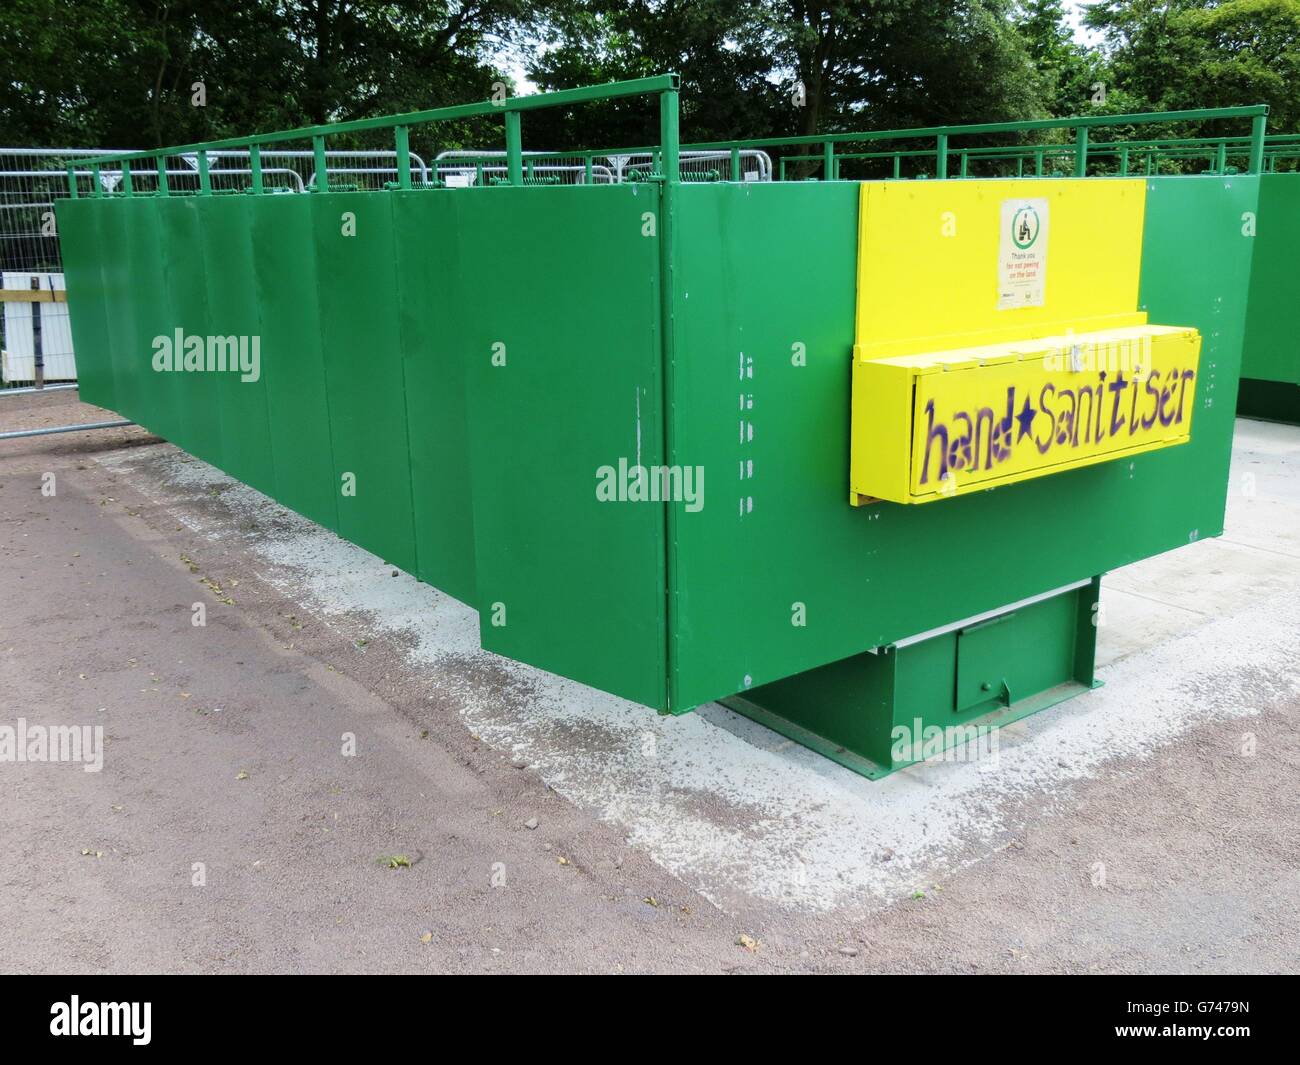 Glastonbury Festival preparations. New long drop toilets installed as preparations are made for the Glastonbury Festival. Stock Photo